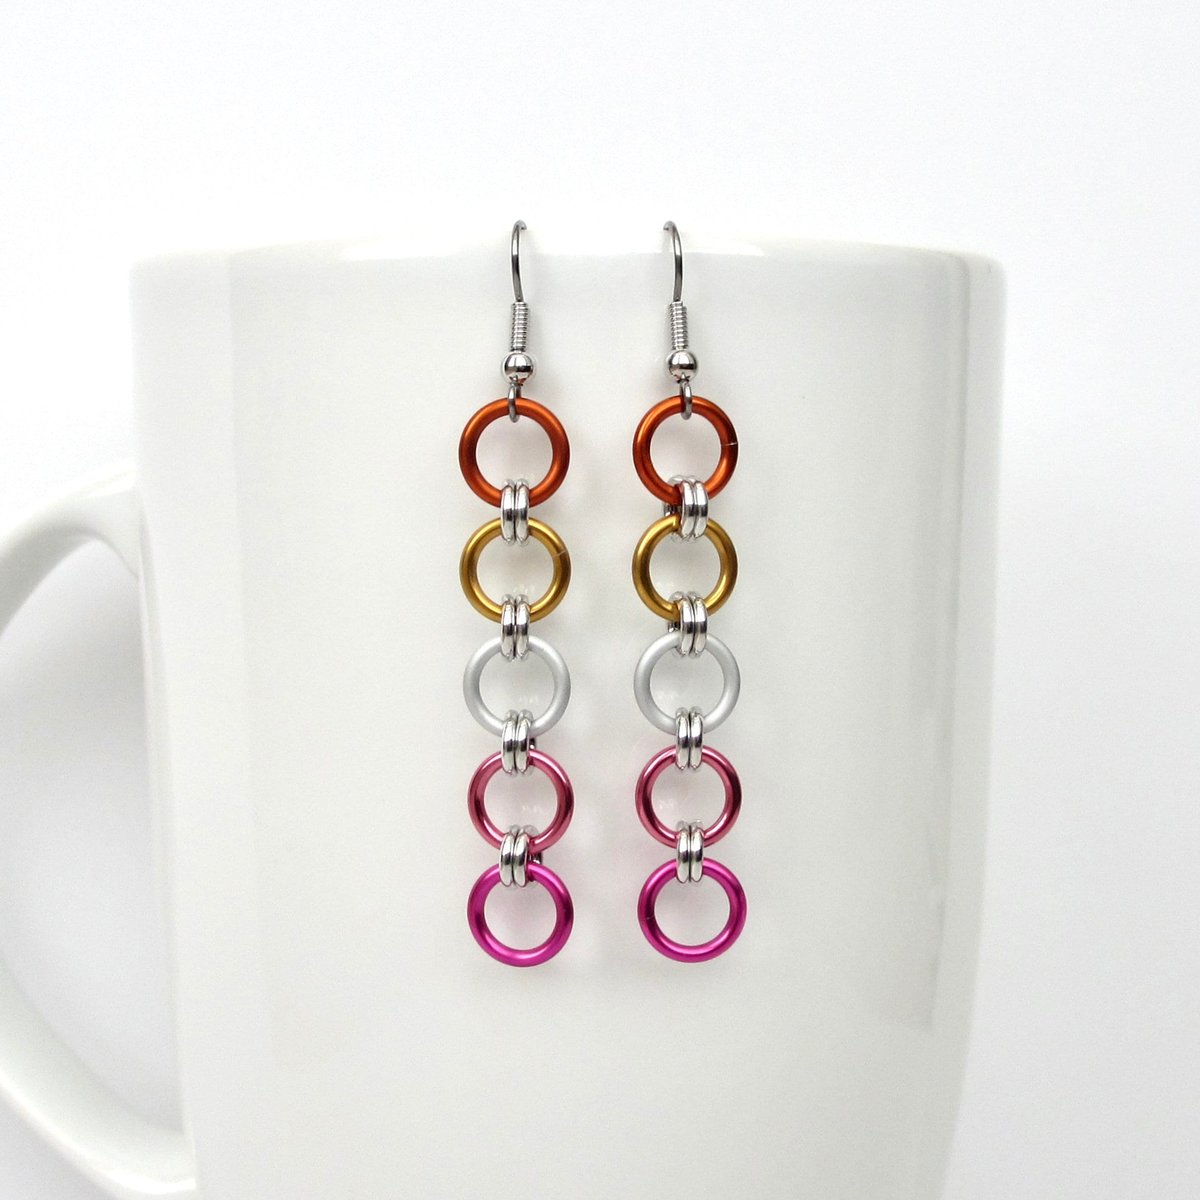 Lesbian flag earrings, simple LGBTQ chainmail jewelry, Pride Month gifts